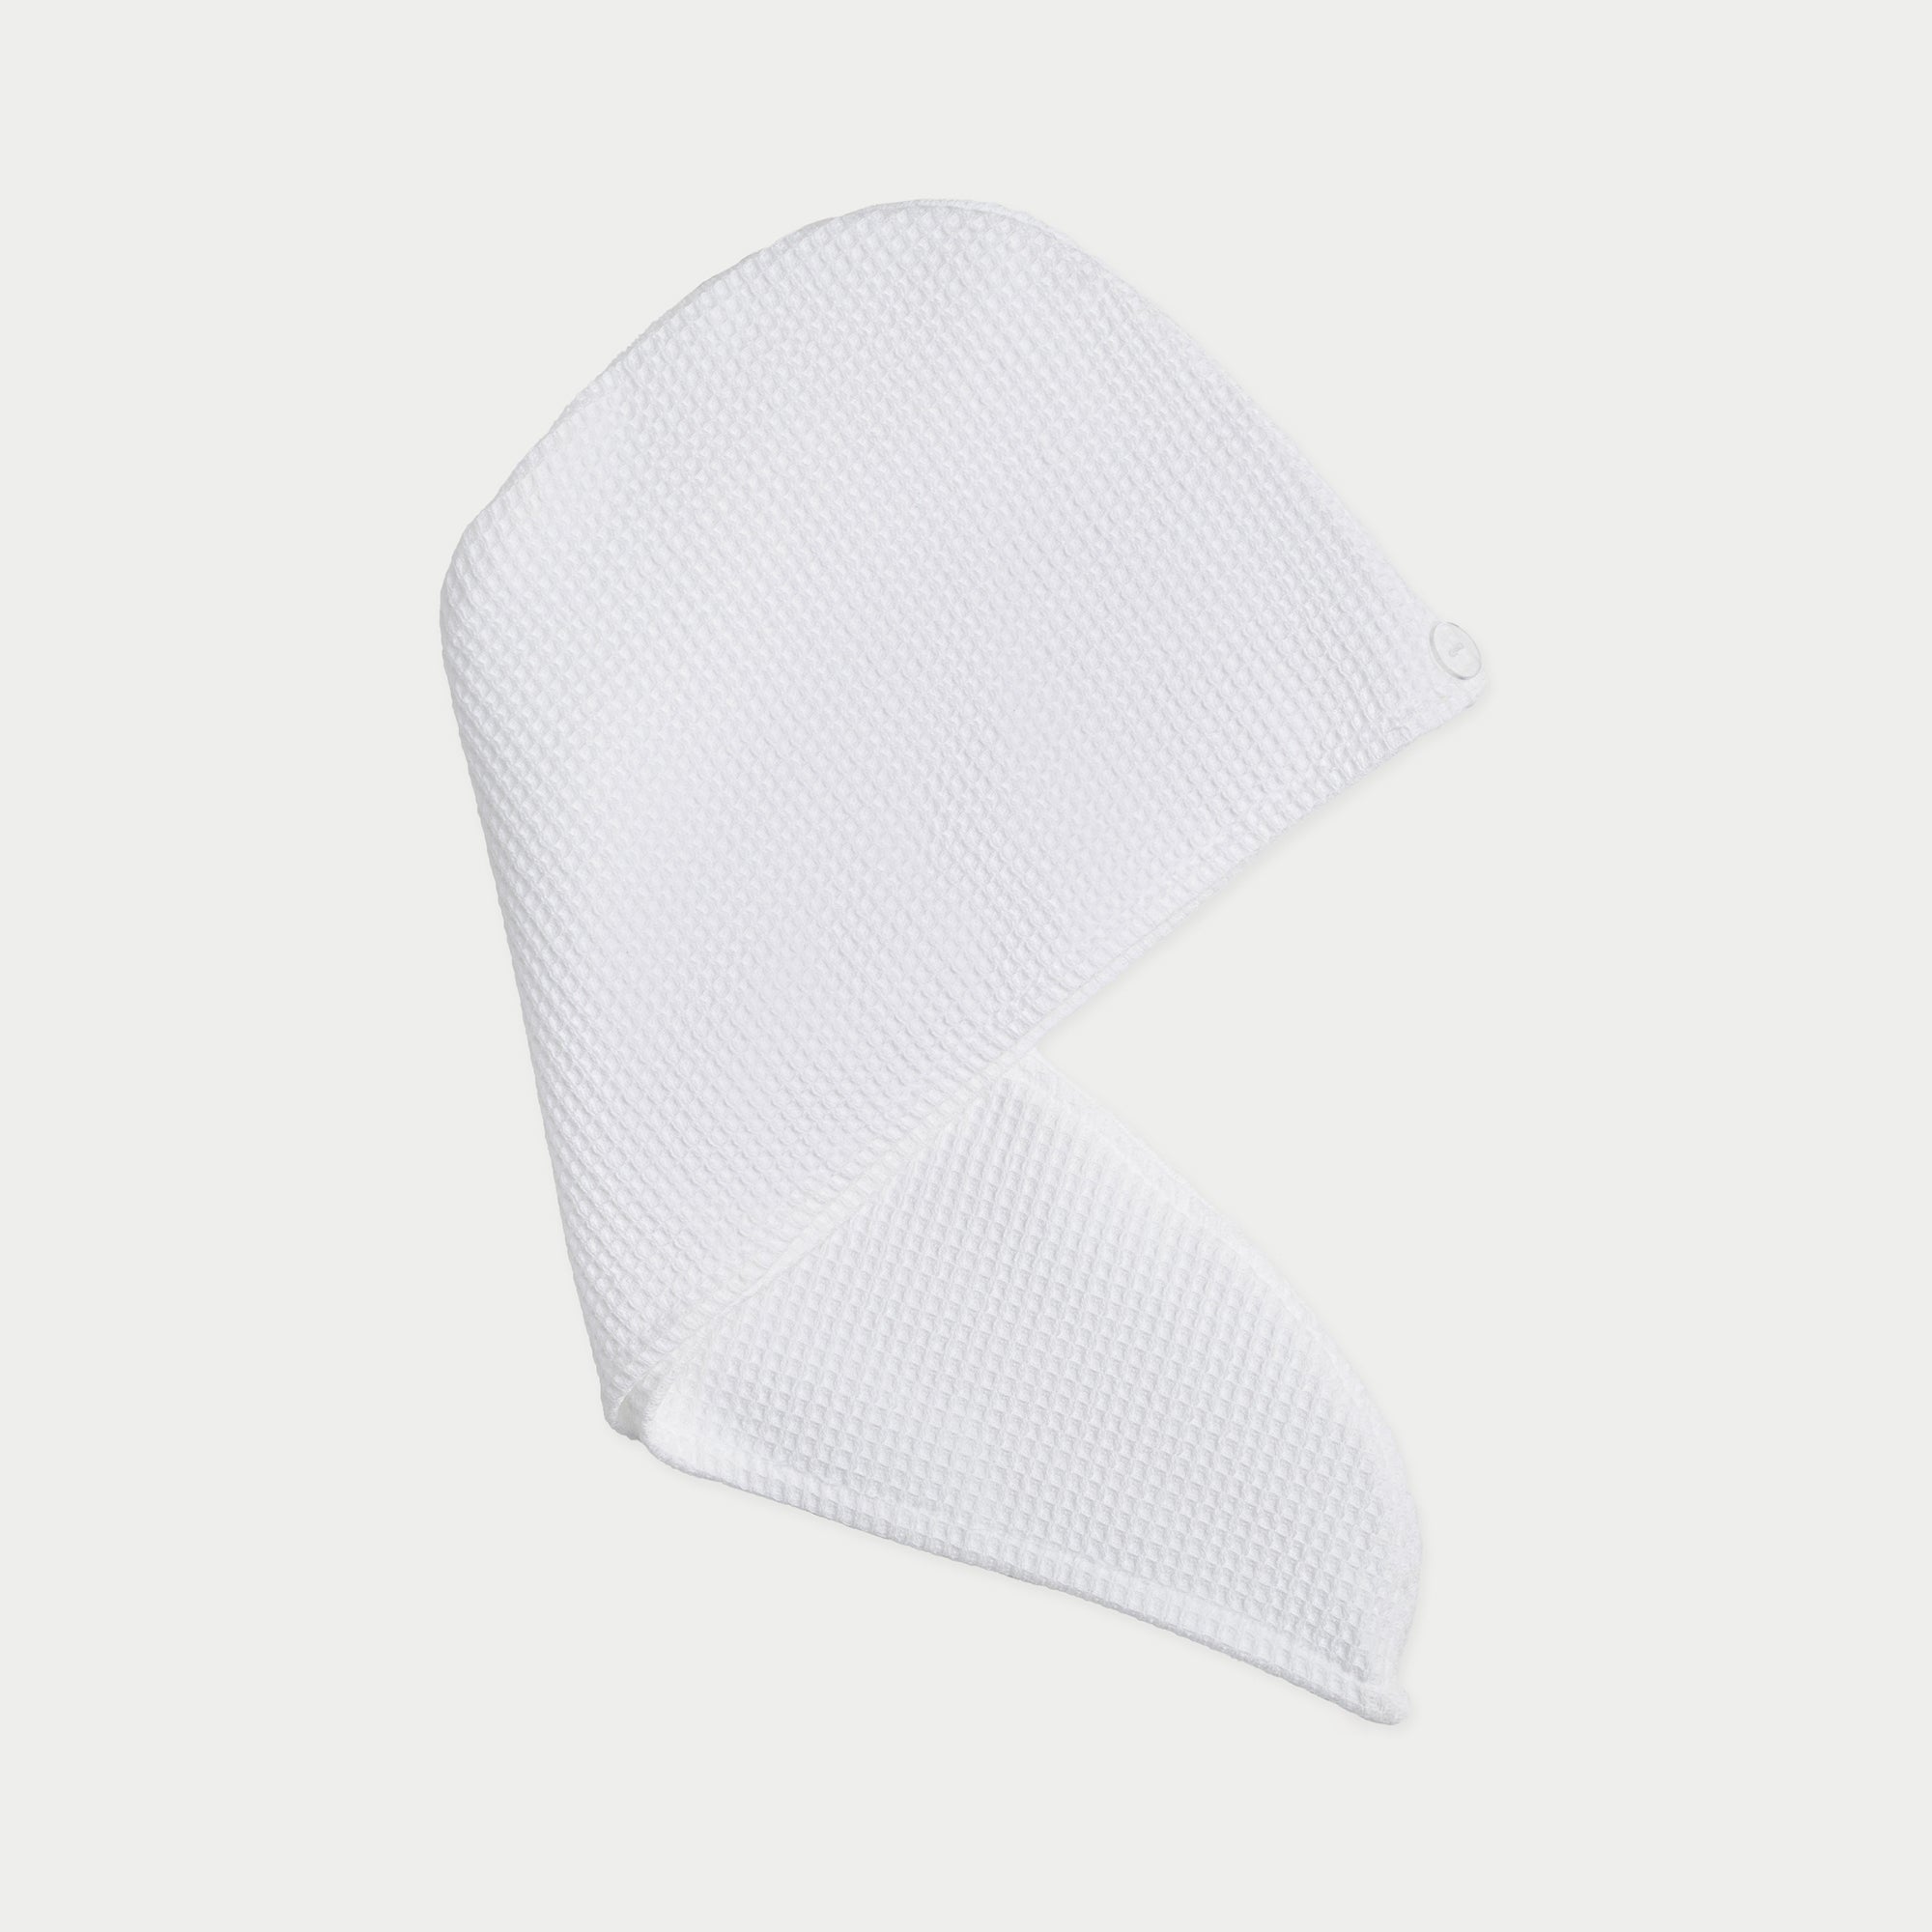 White Waffle Hair Towel. The hair towel is photo graphed with a white background.|Color:White